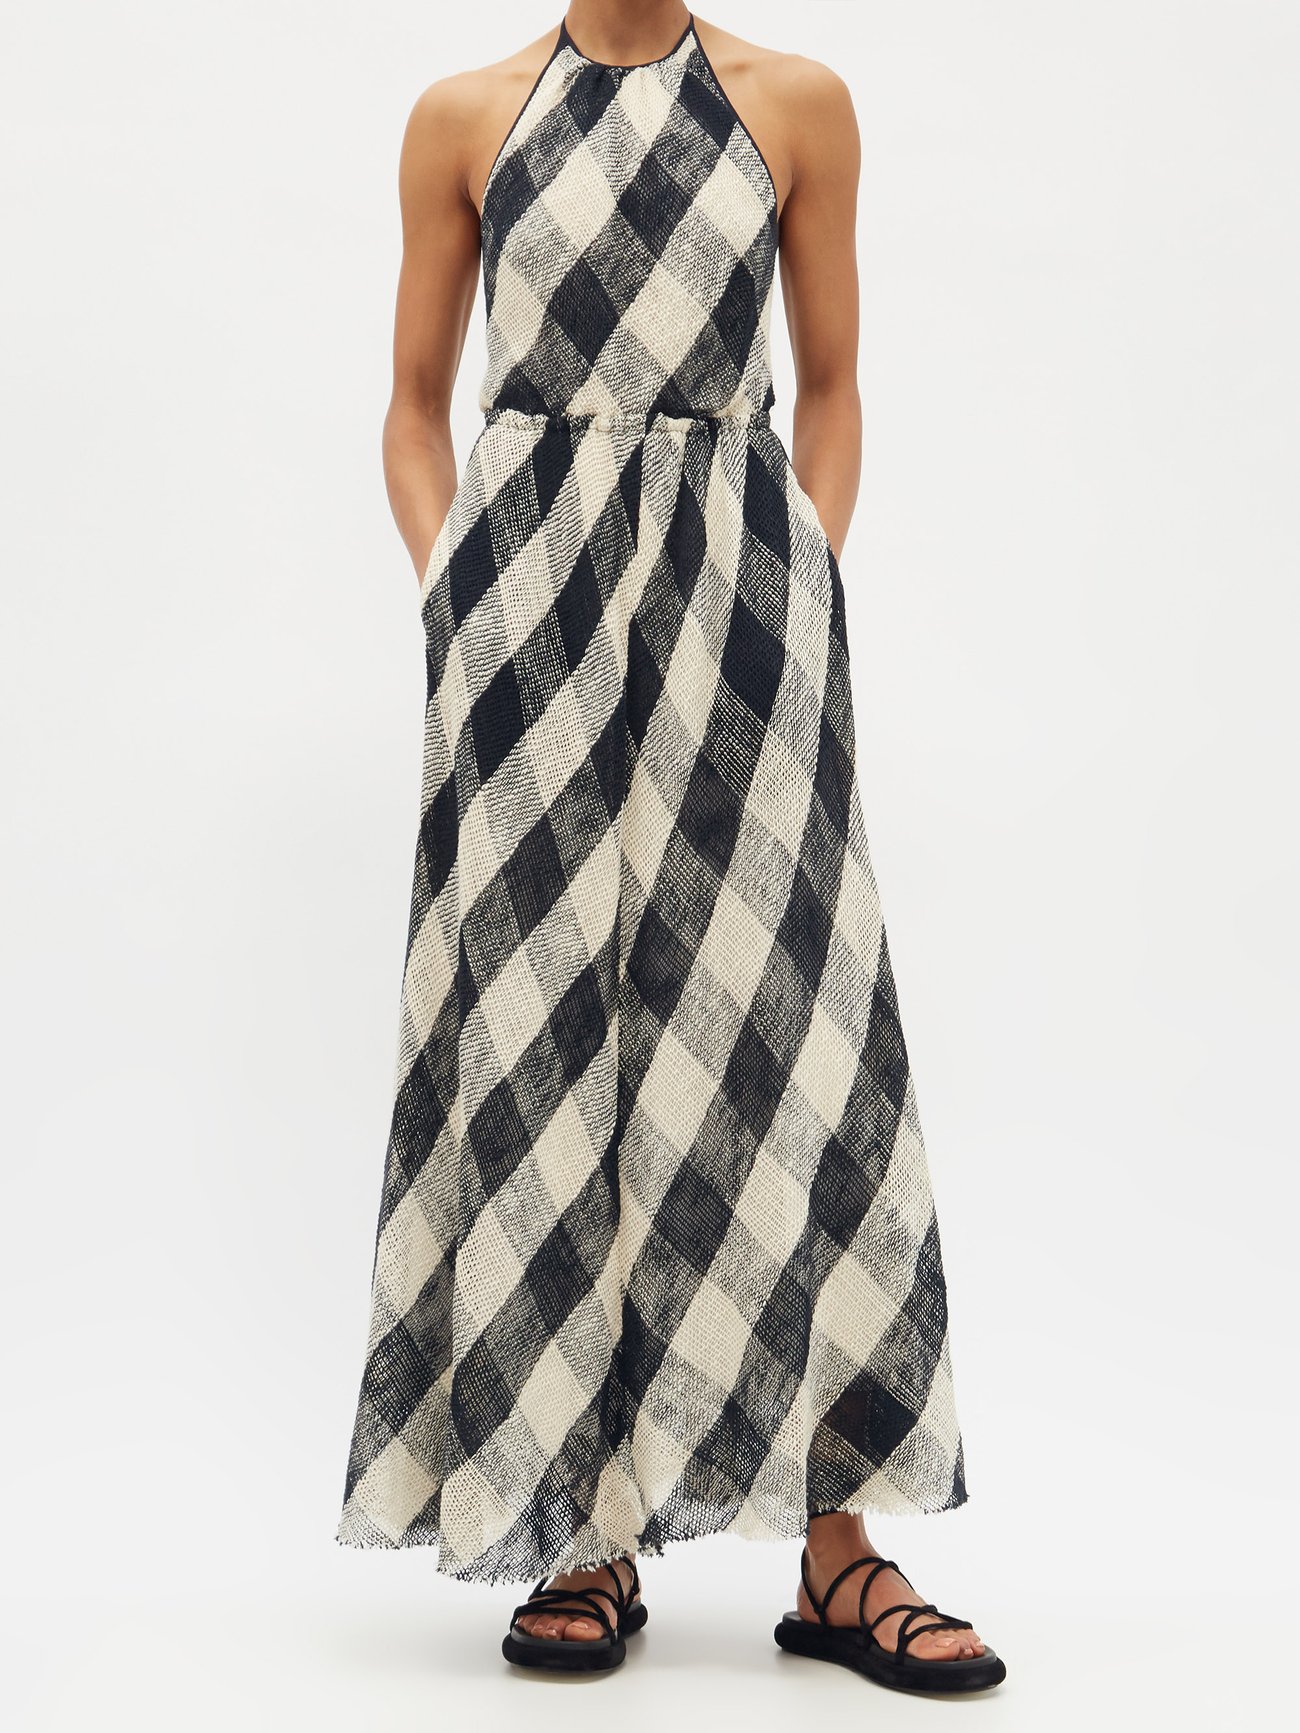 Raey's navy and cream checked maxi dress is shaped from open-weave cotton, imparting it with a rustic mood. It's made in the UK to a halterneck silhouette with an elasticated waist and a full skirt complemented by a raw hem, then lined in silk chiffon.